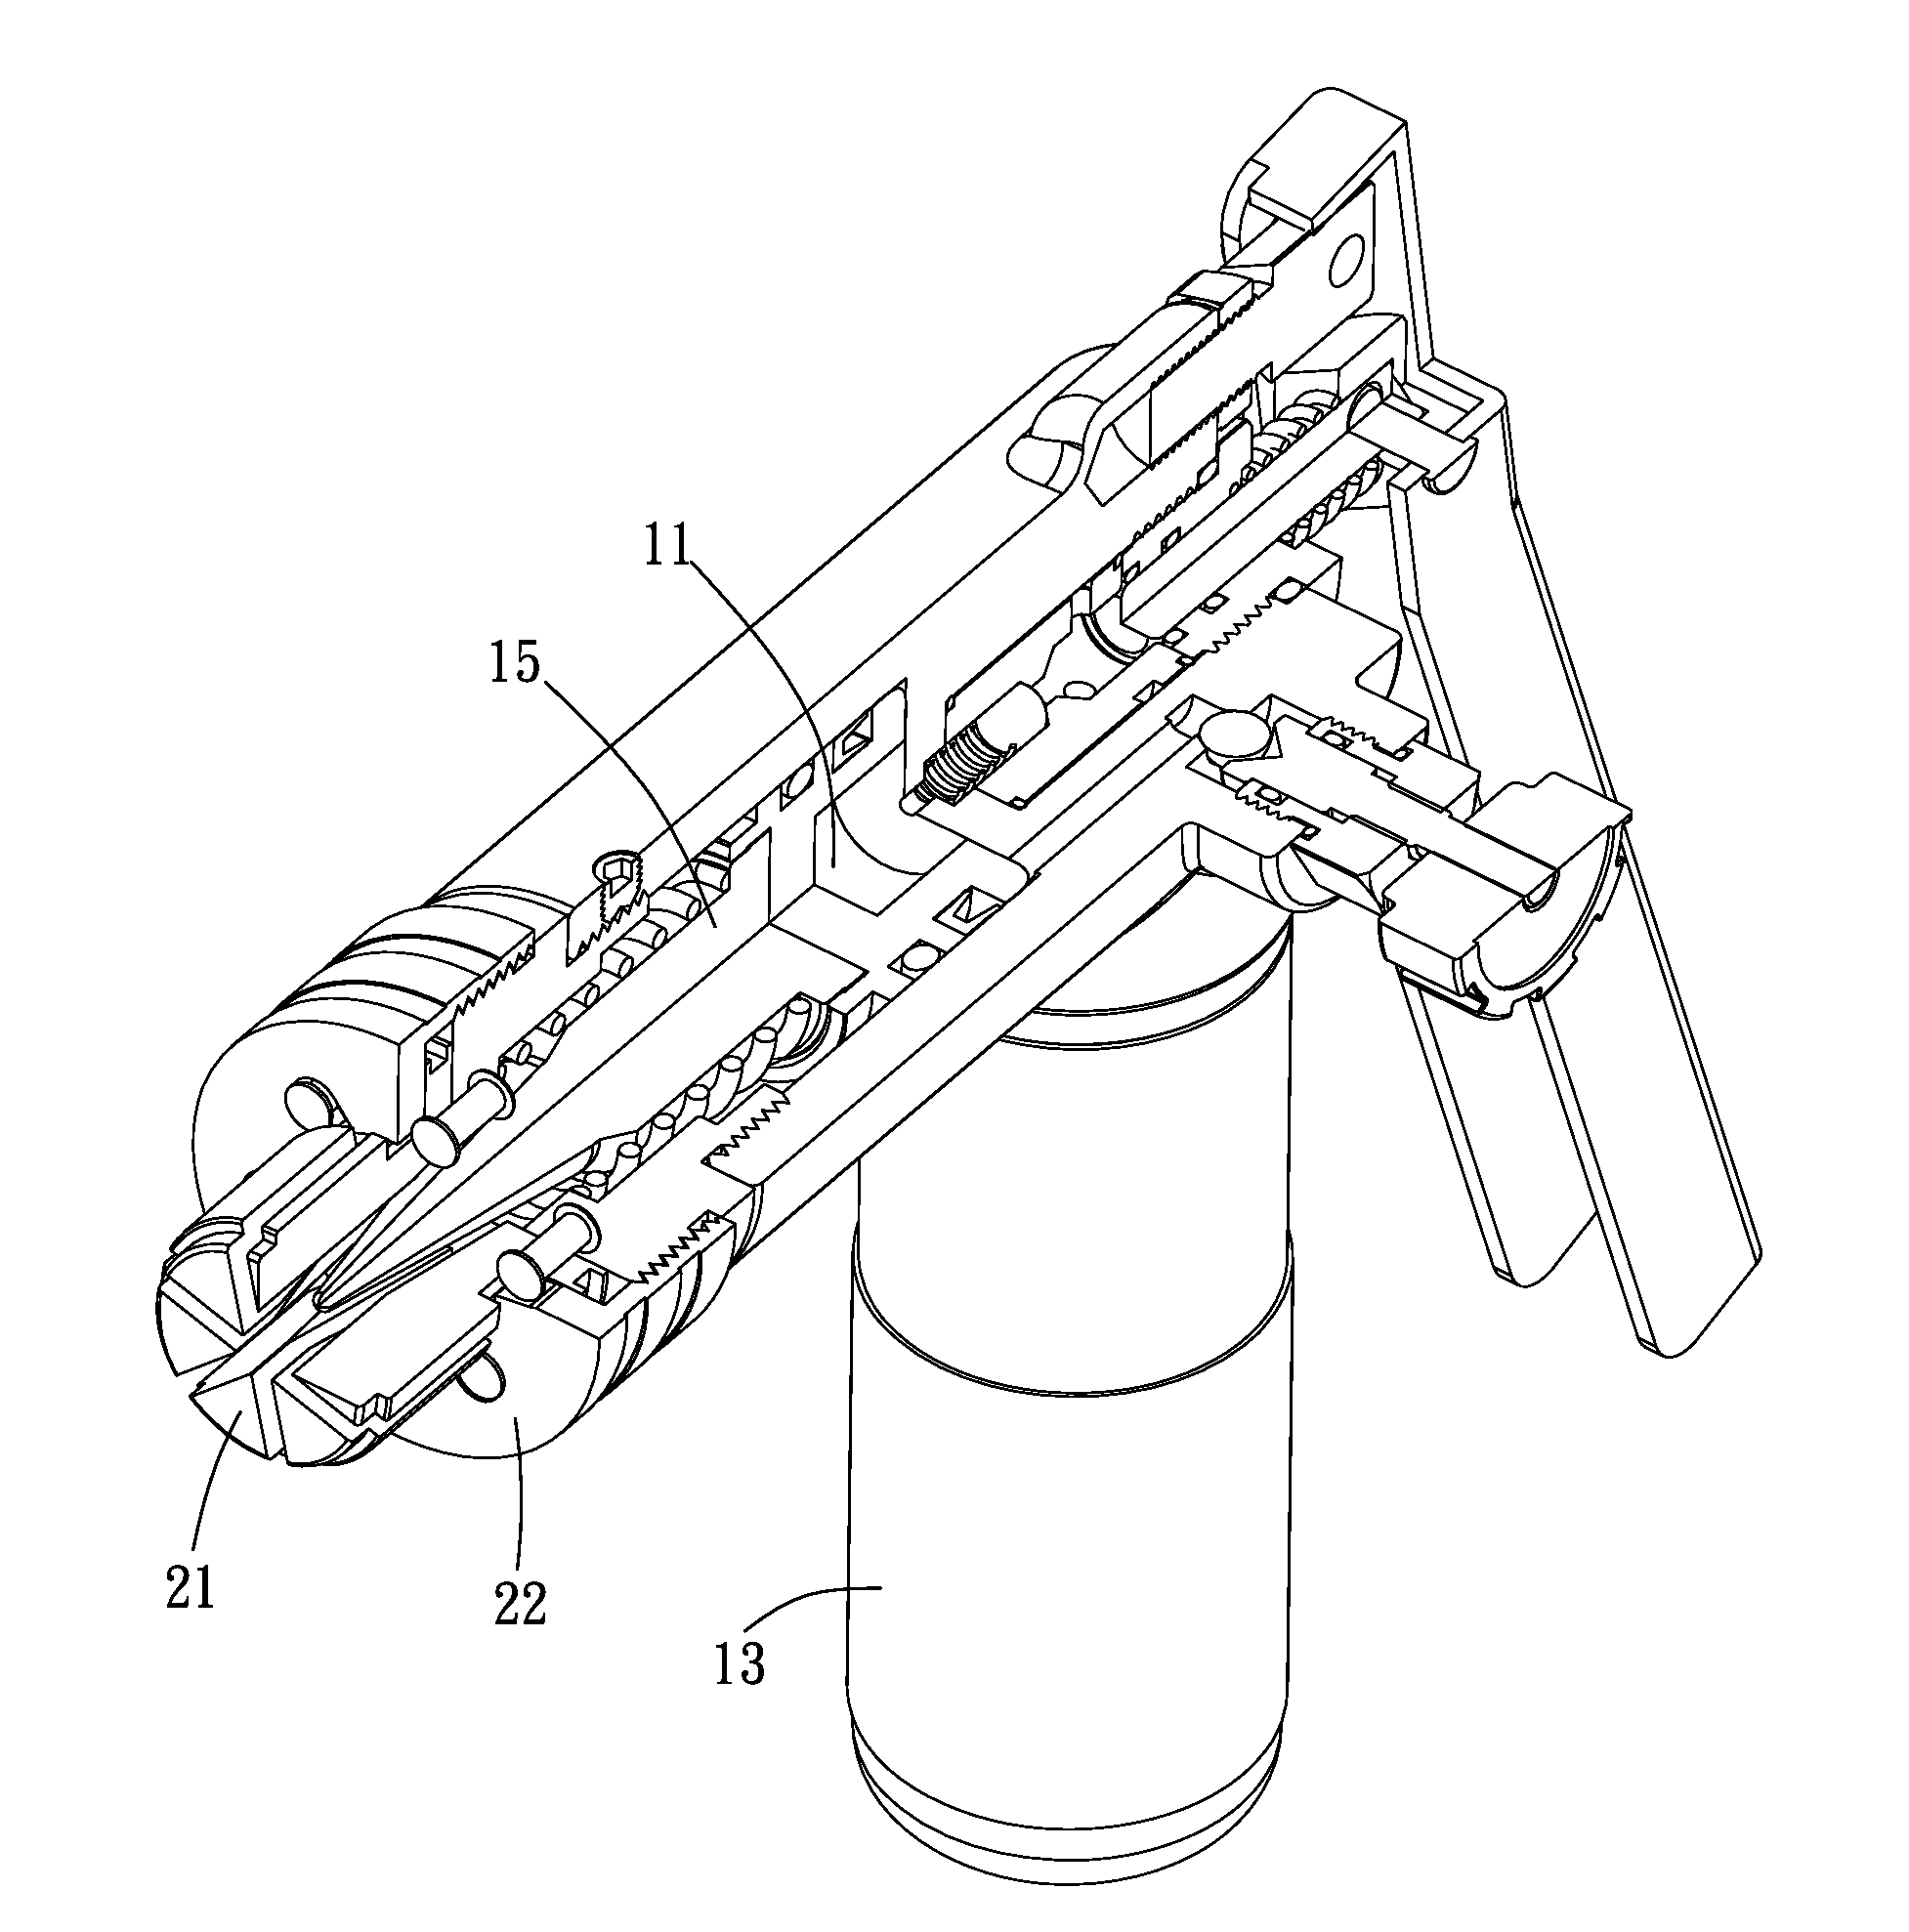 Flaring device for a tubular member